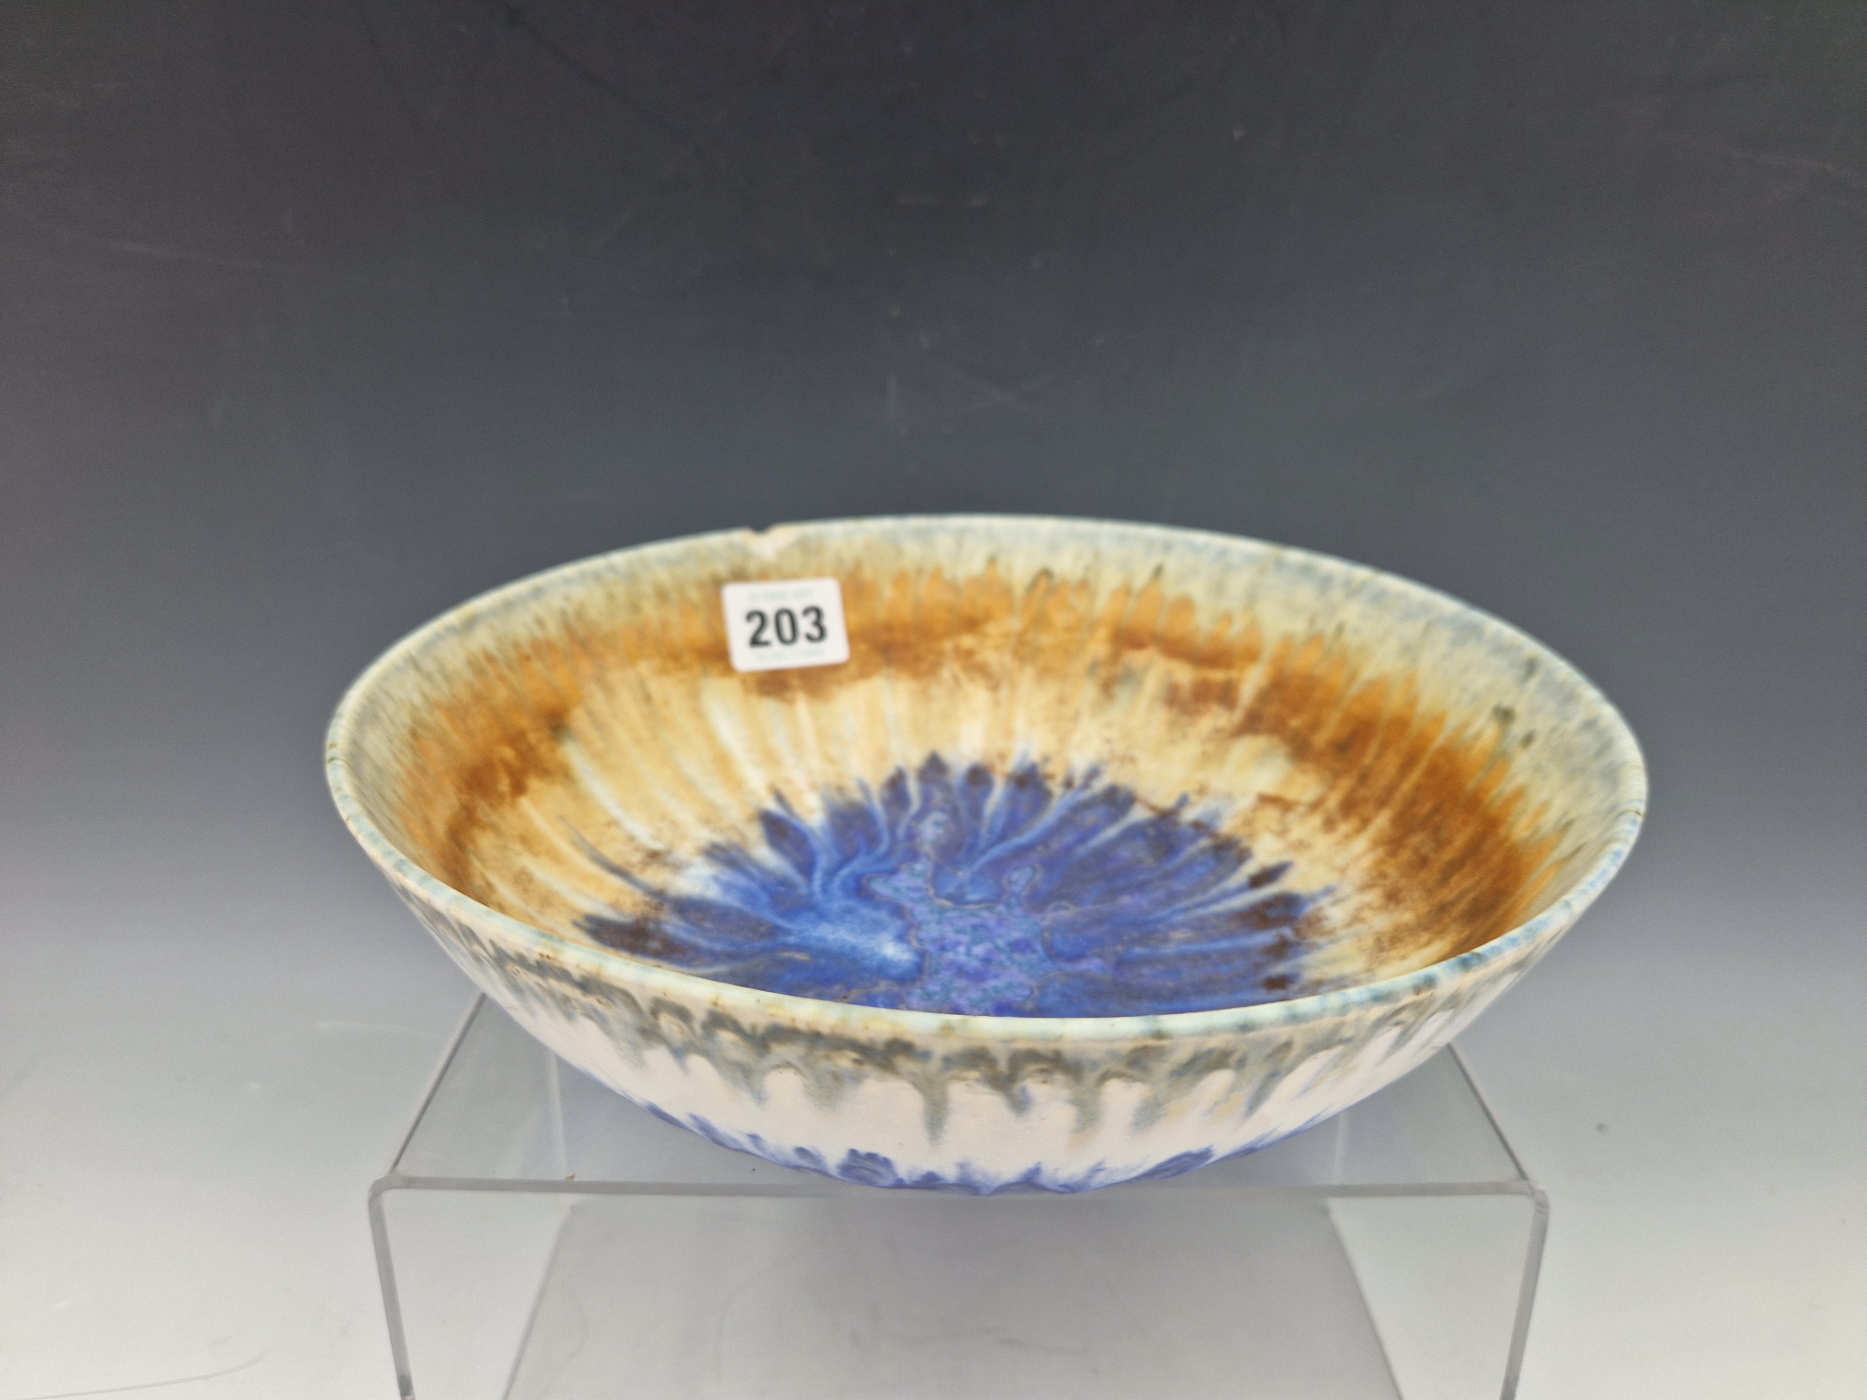 A 1932 RUSKIN HIGH FIRED BOWL,M THE STREAKY COLOURS OF THE INTERIOR TONING FROM GREY THROUGH BROWN - Image 2 of 6